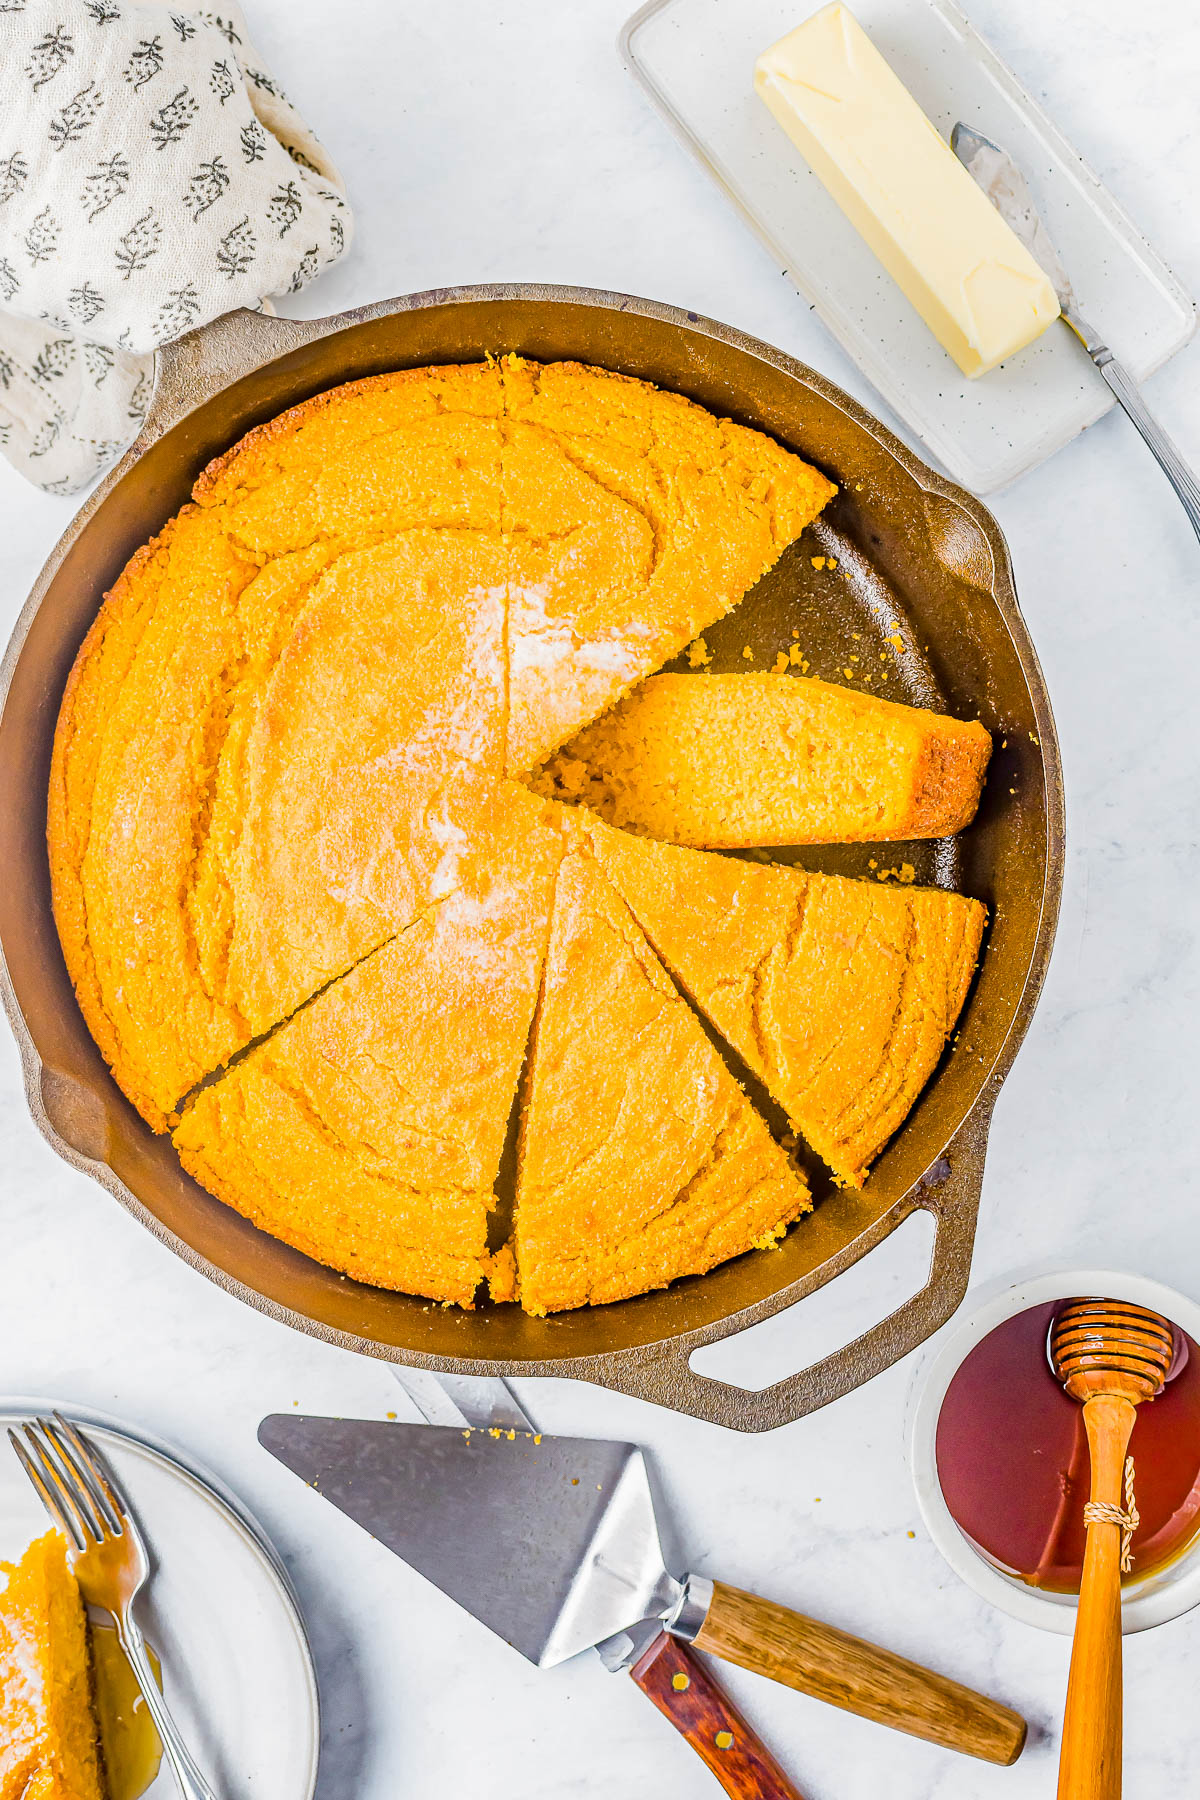 Sweet Potato Cornbread – Homemade cornbread just got better because it’s jazzed up with mashed sweet potatoes, brown sugar, and pumpkin pie spice! Thanks to the natural moisture from sweet potatoes and the addition of buttermilk, it’s so moist and flavorful! Whether you’re looking for a fall-inspired comfort food recipe or a new Thanksgiving or Christmas side dish, this cornbread is EASY and will become a new family FAVORITE!